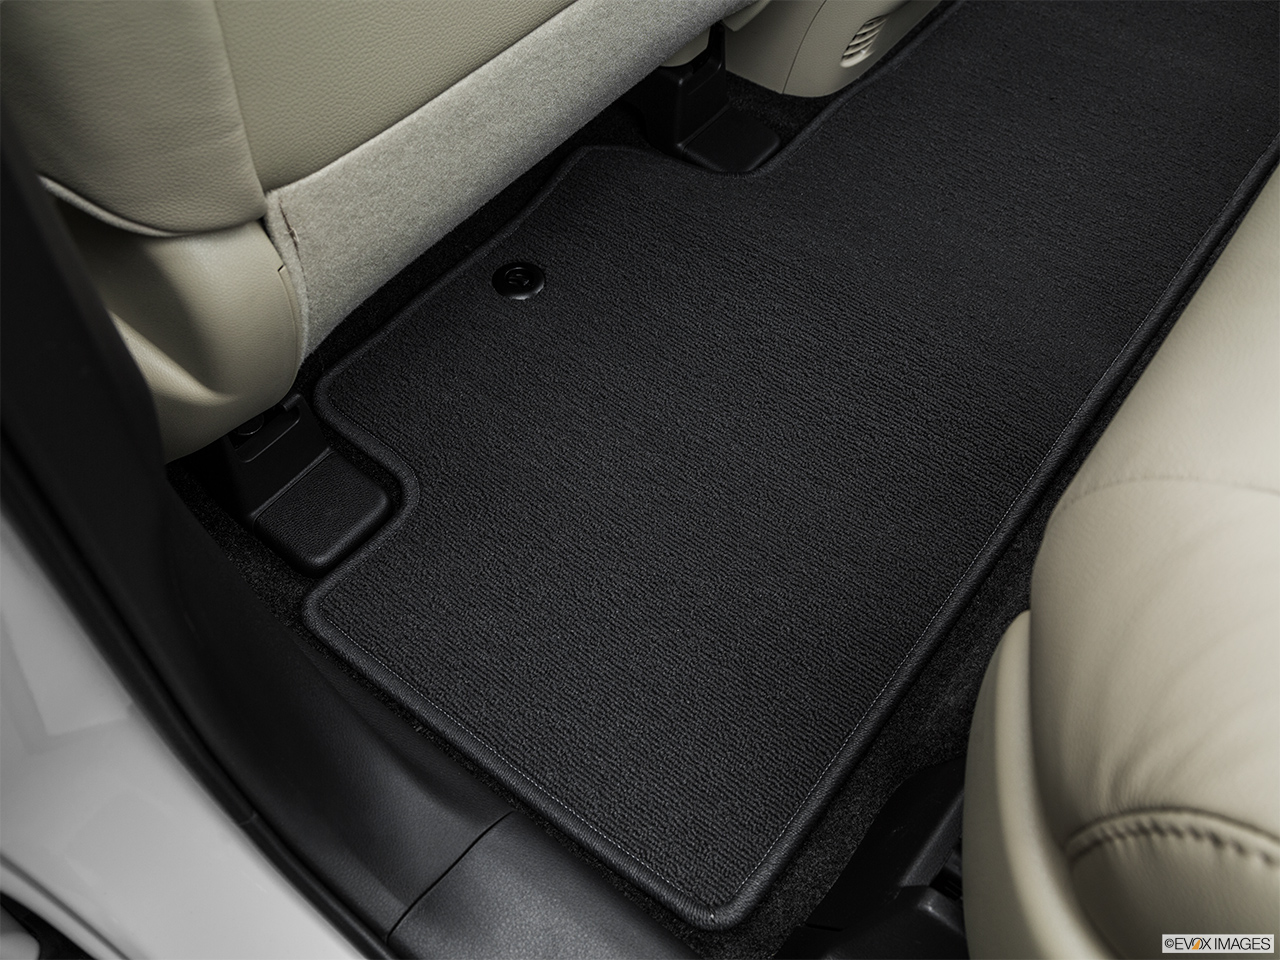 2016 Acura MDX SH-AWD Rear driver's side floor mat. Mid-seat level from outside looking in. 